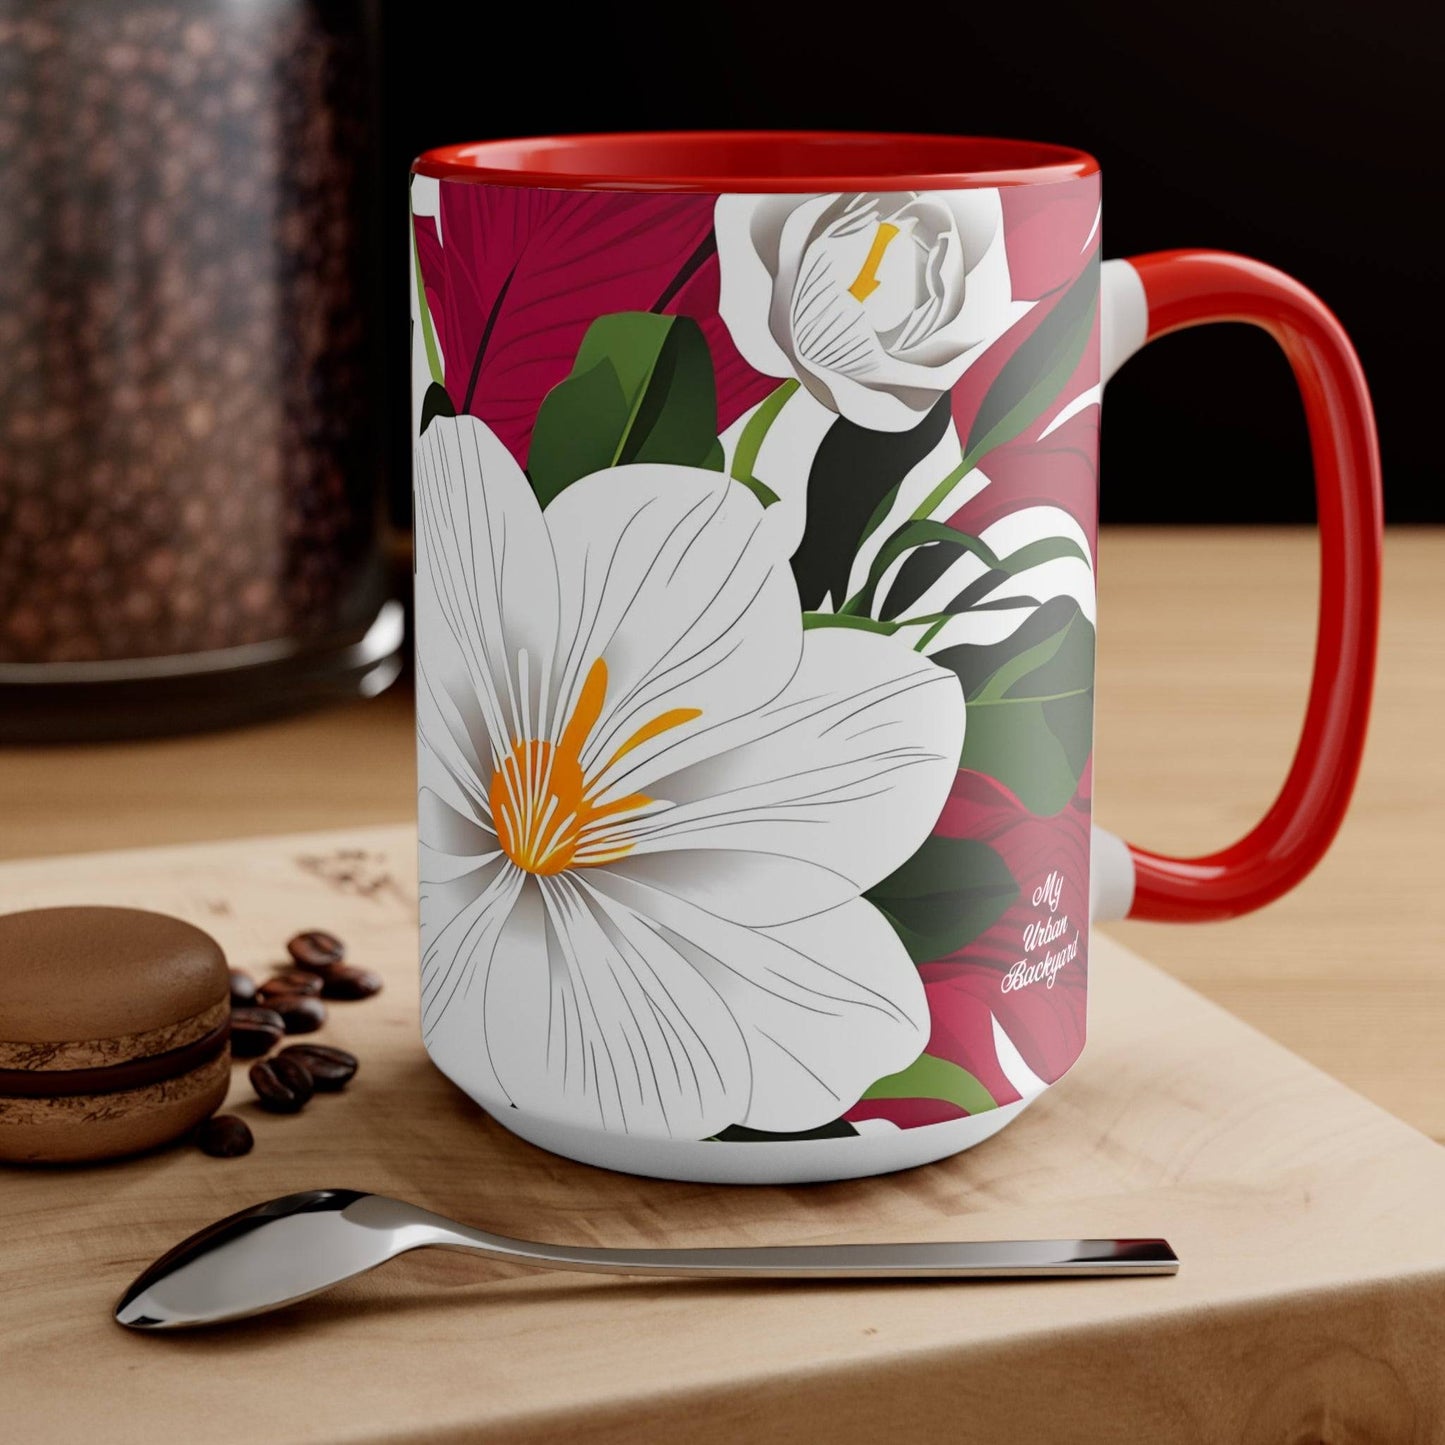 Ceramic Mug for Coffee, Tea, Hot Cocoa. Home/Office, White Flowers on Red